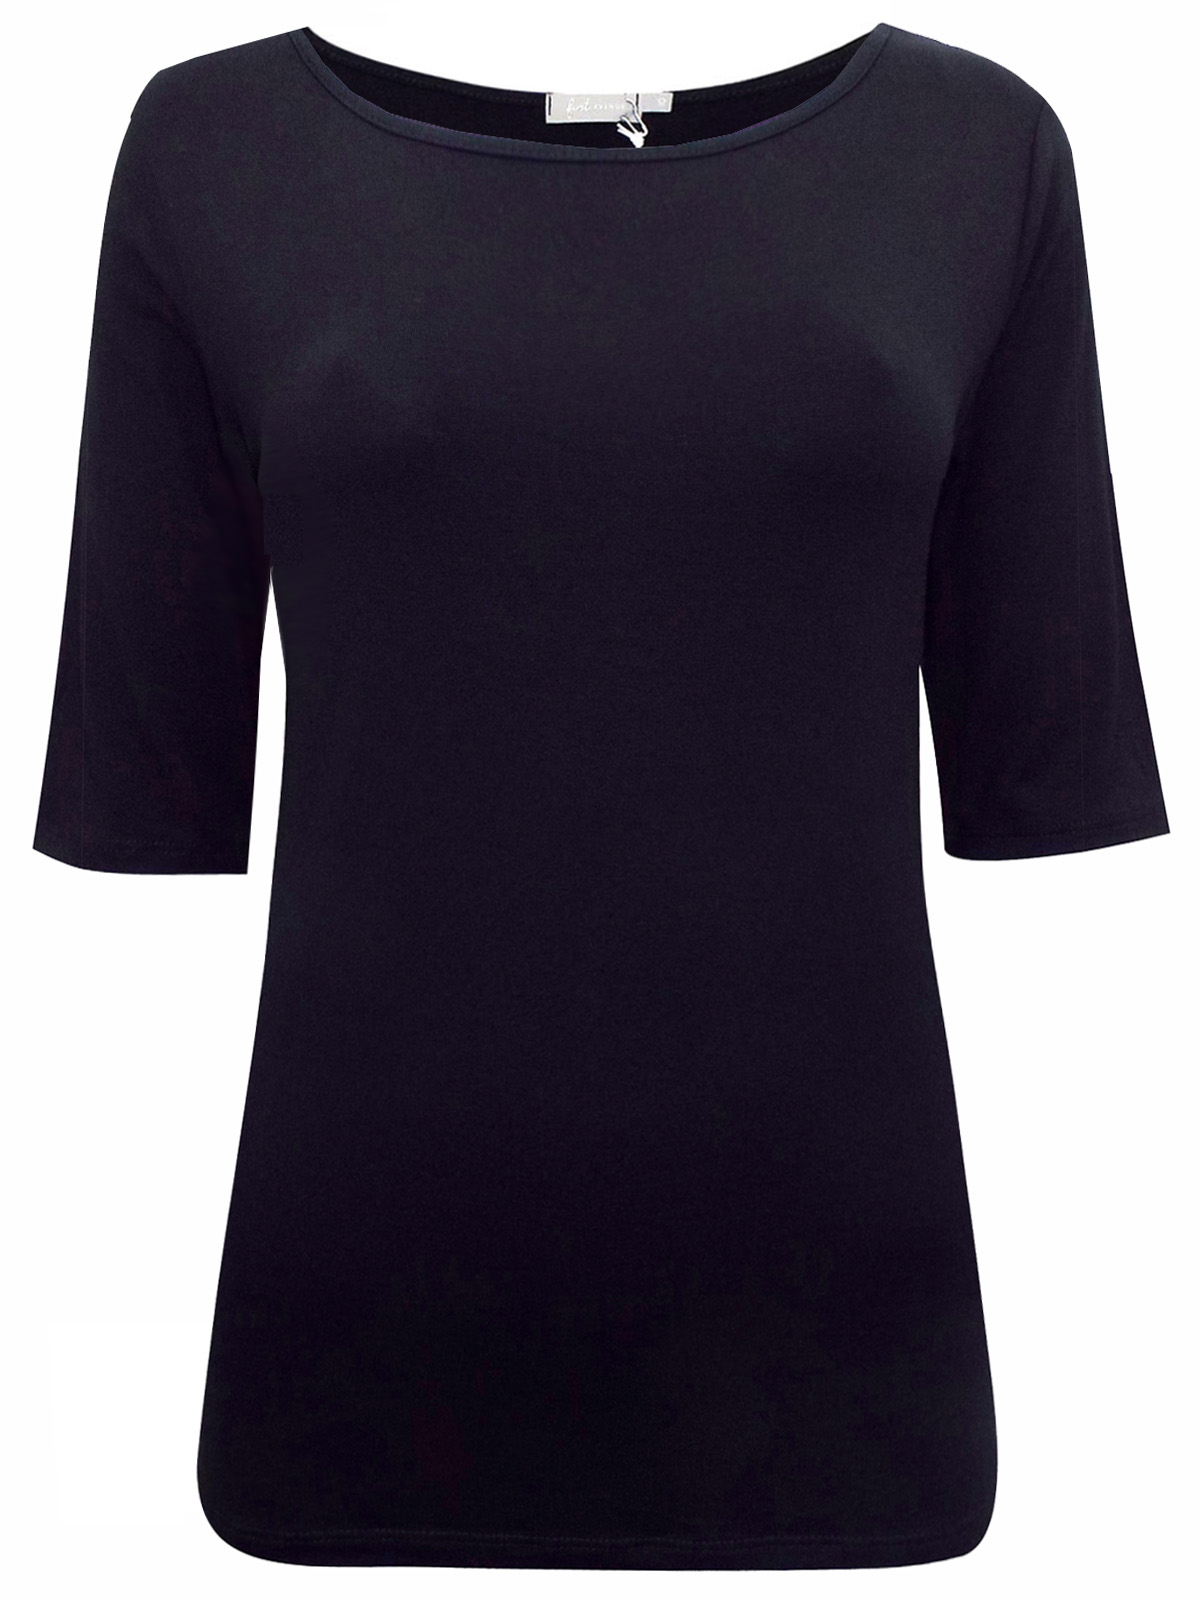 First Avenue BLACK Half Sleeve Jersey Top - Size 10 to 20